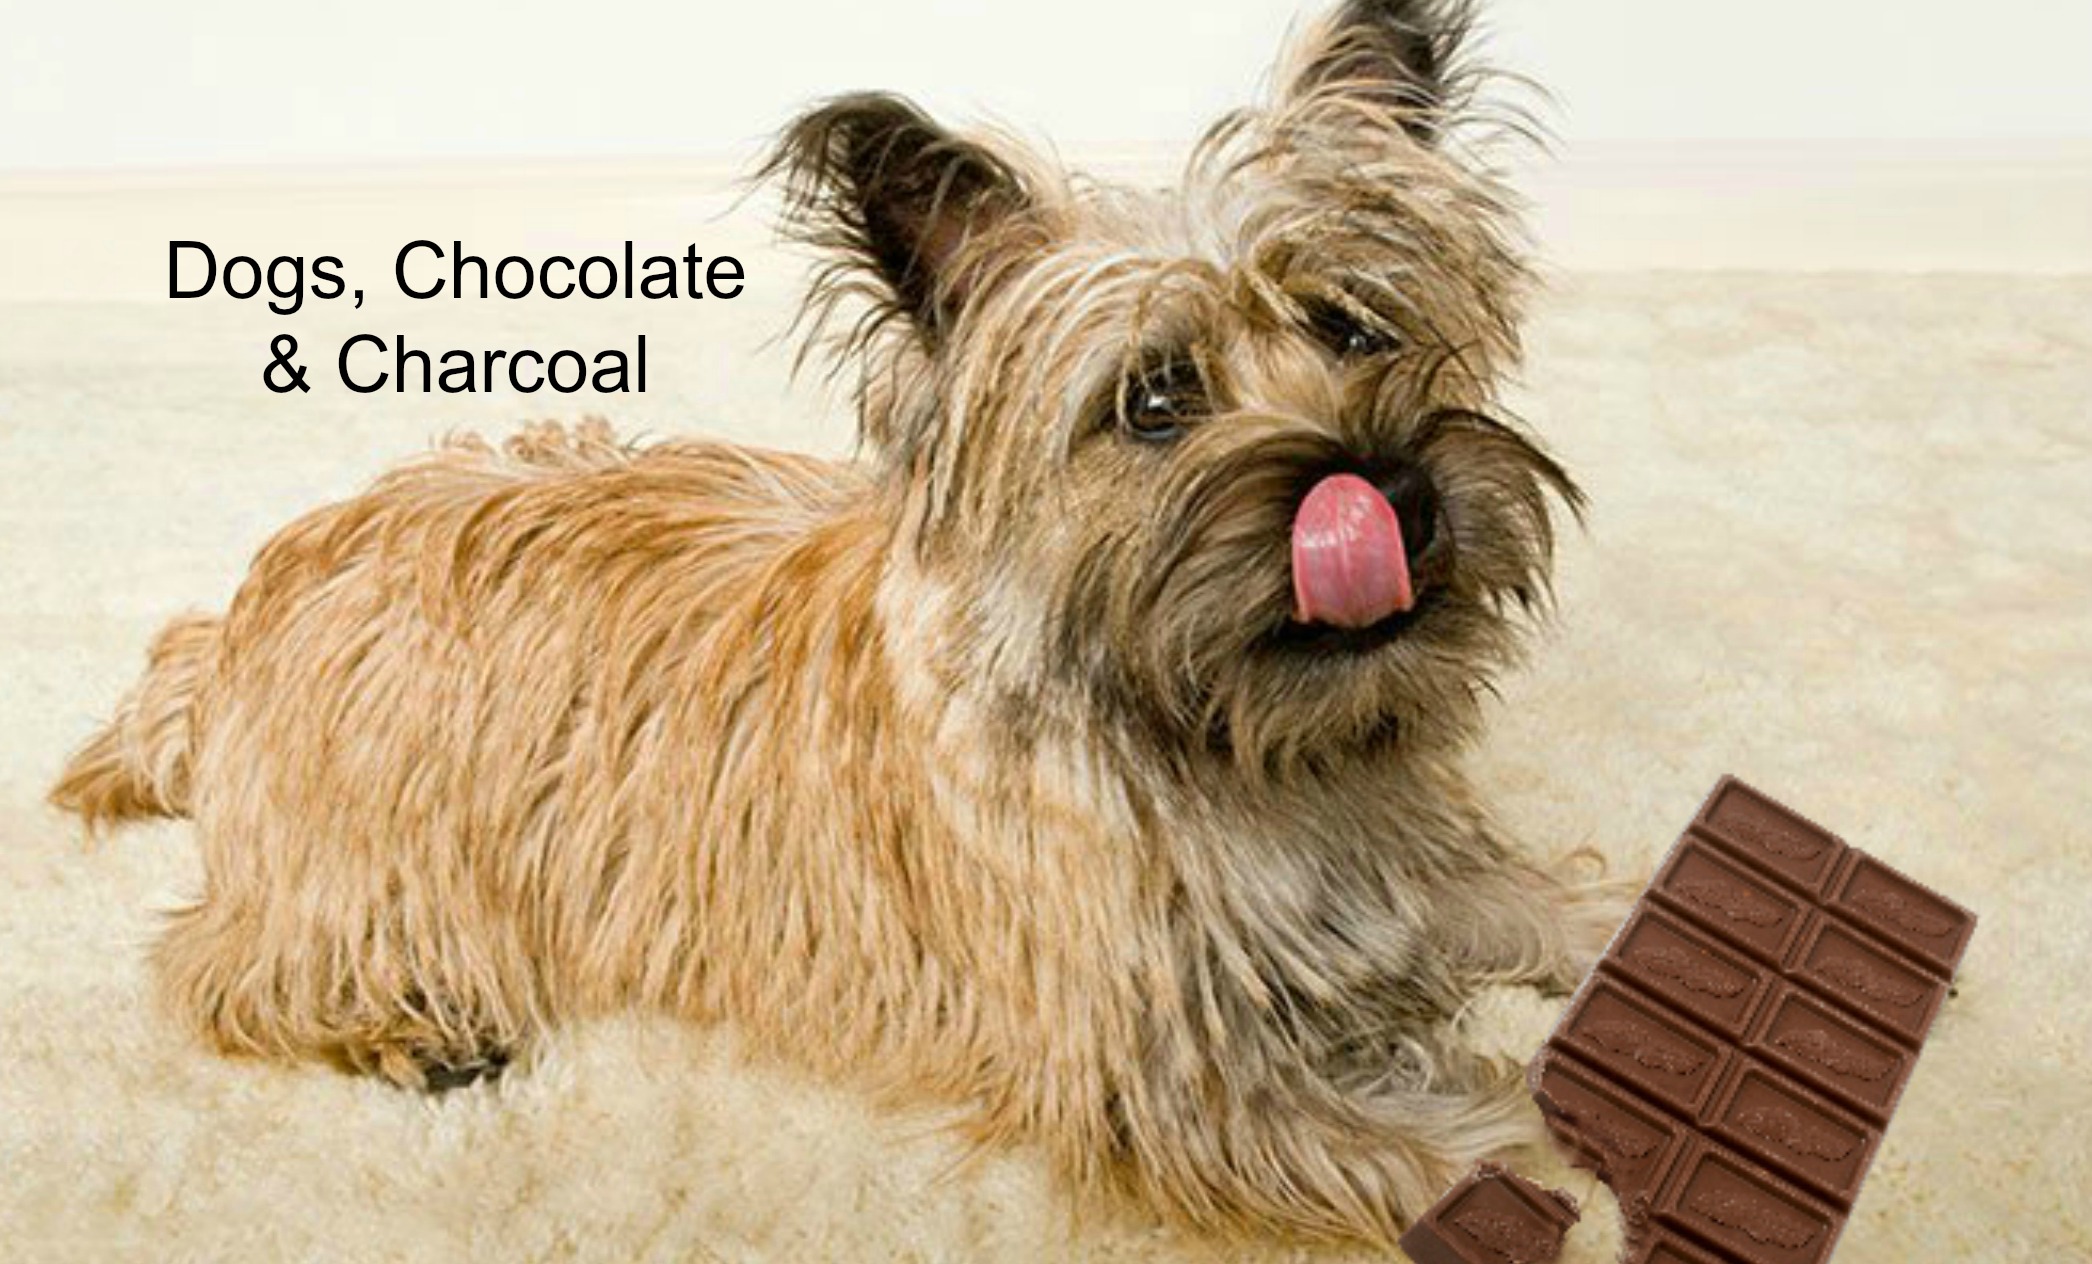 Dogs Chocolate Charcoal header - Dogs, Chocolate and Charcoal